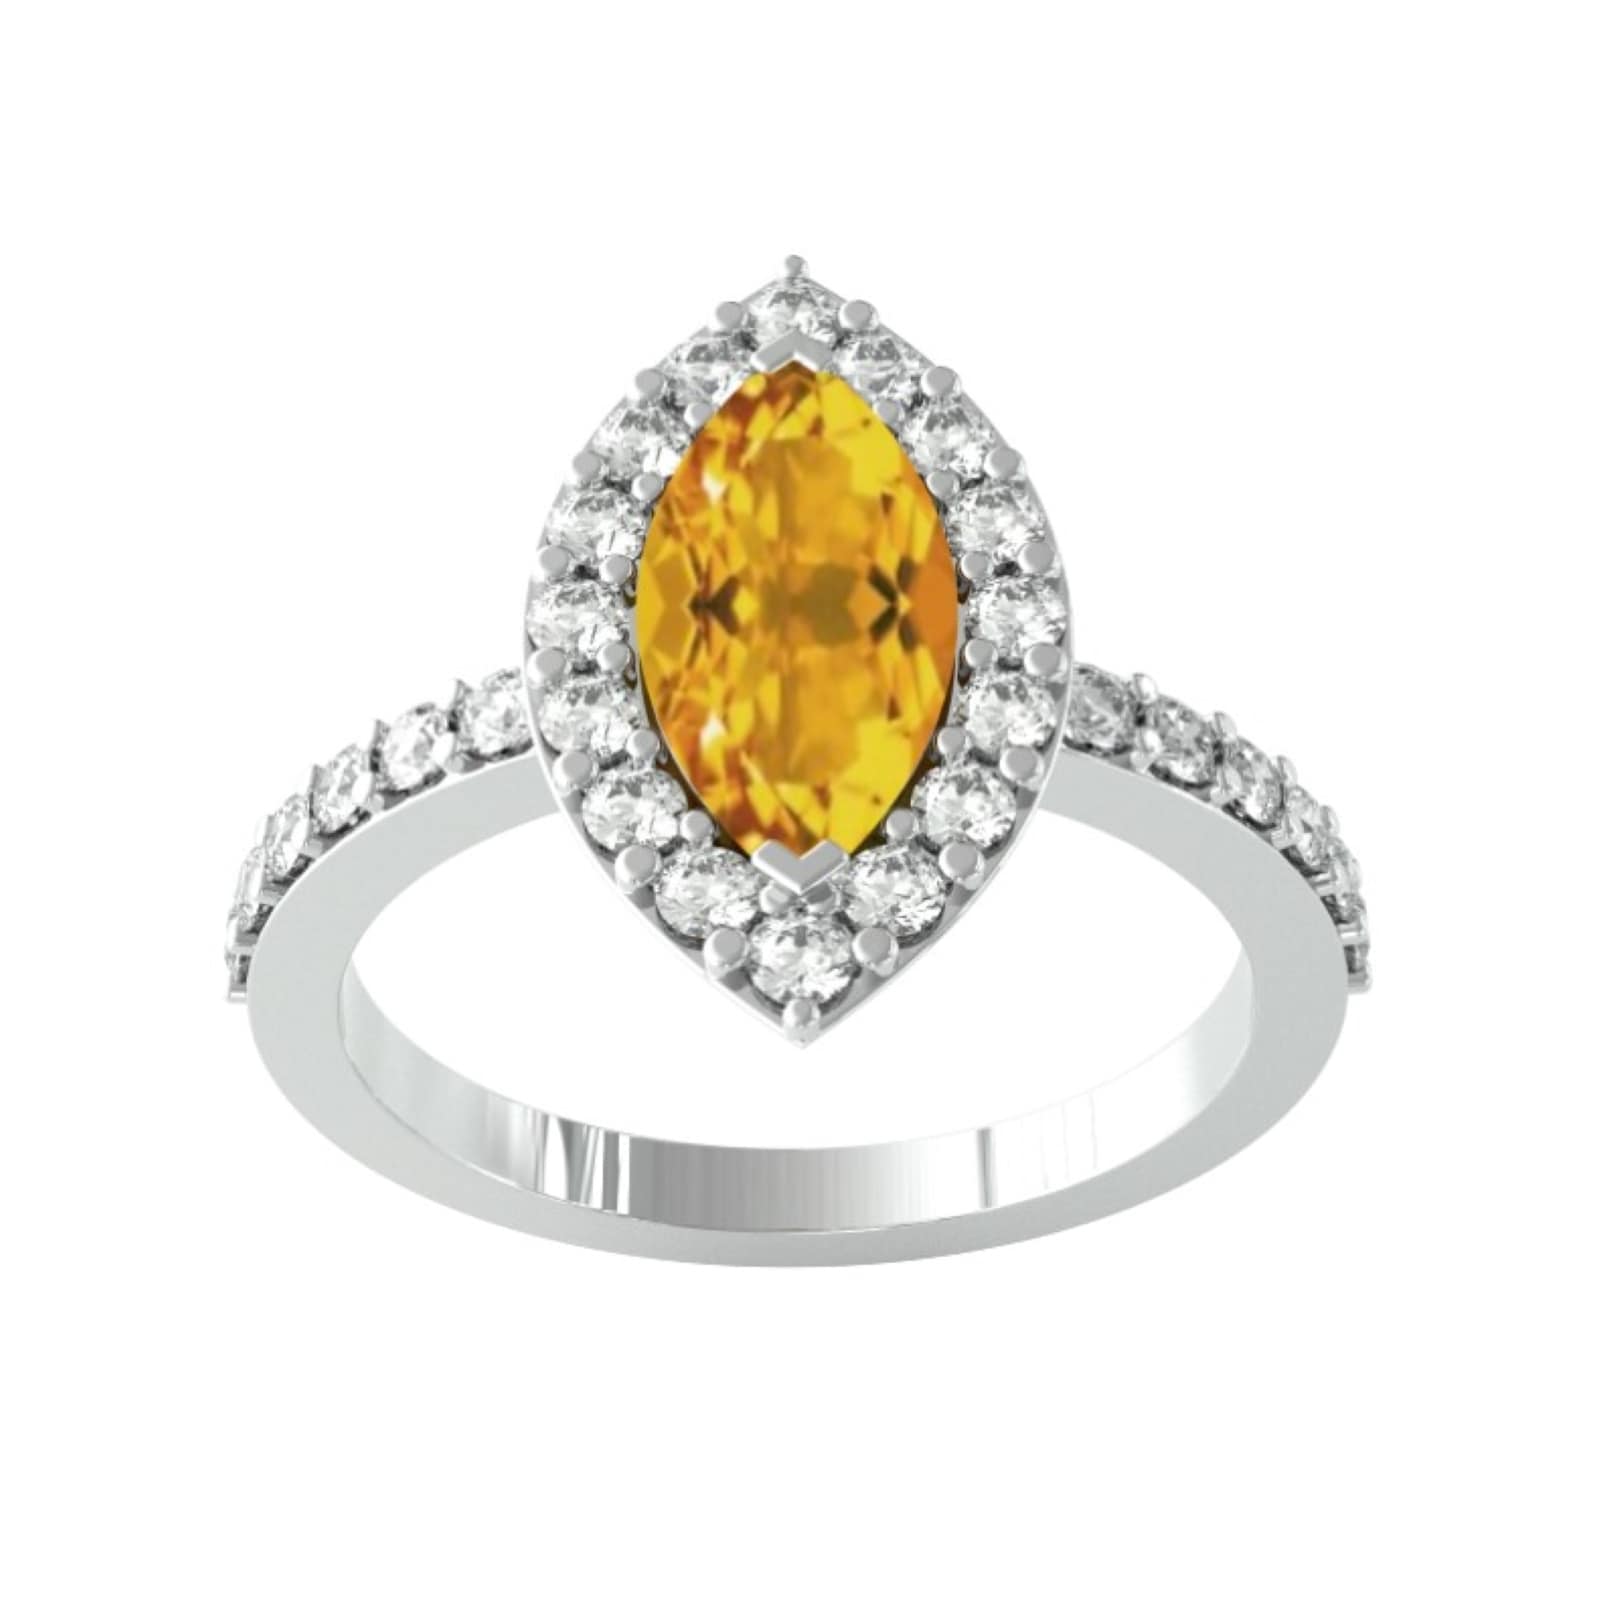 9ct White Gold Marquise Cut Citrine & Diamond Ring - Ring Size S.5